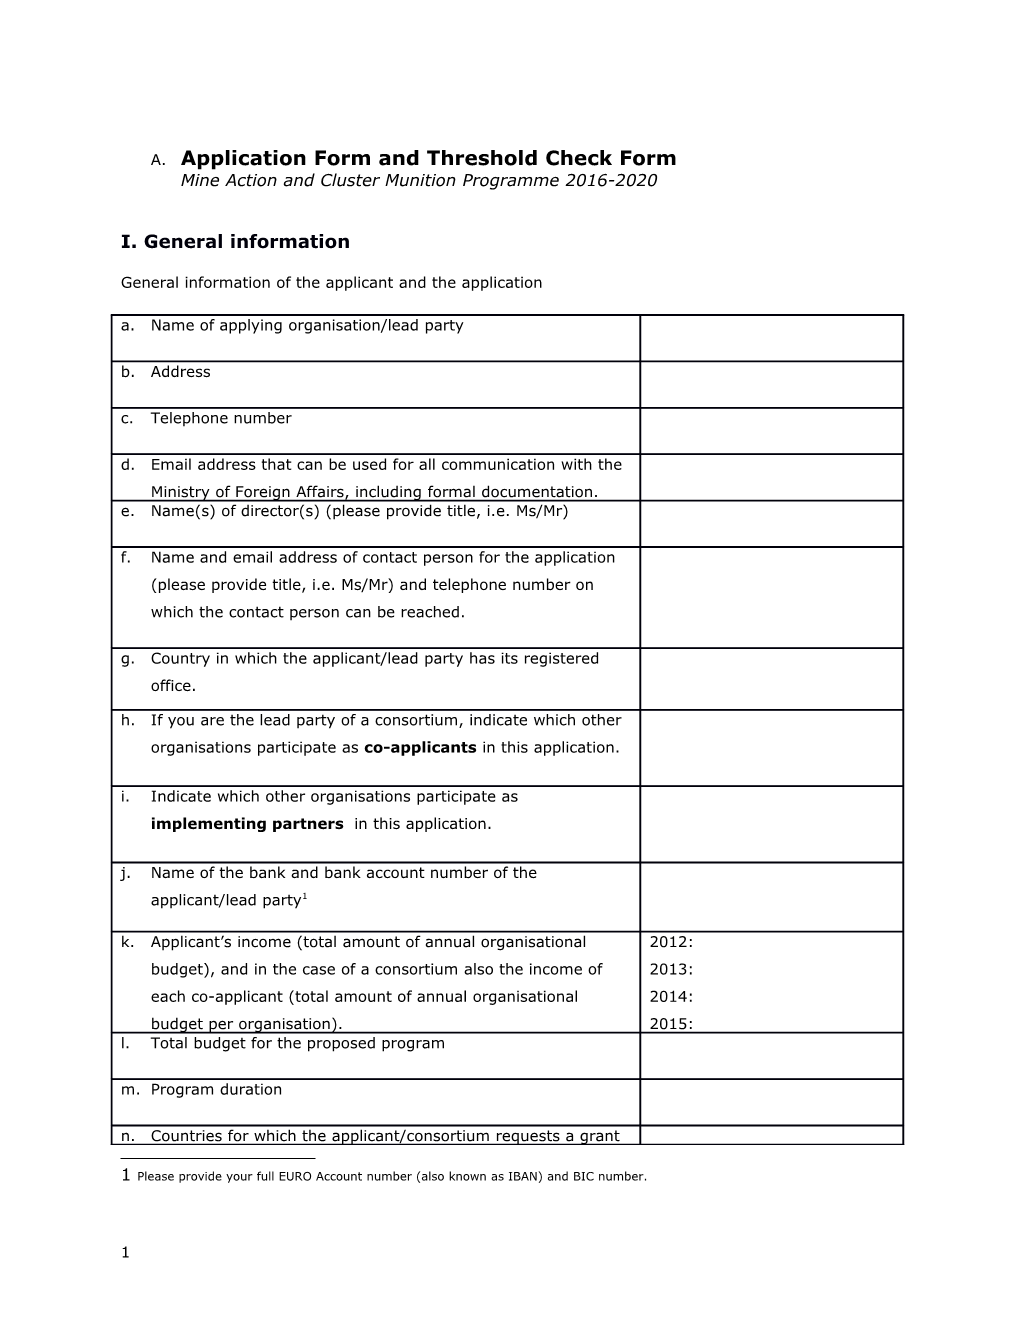 A. Application Form and Threshold Check Form